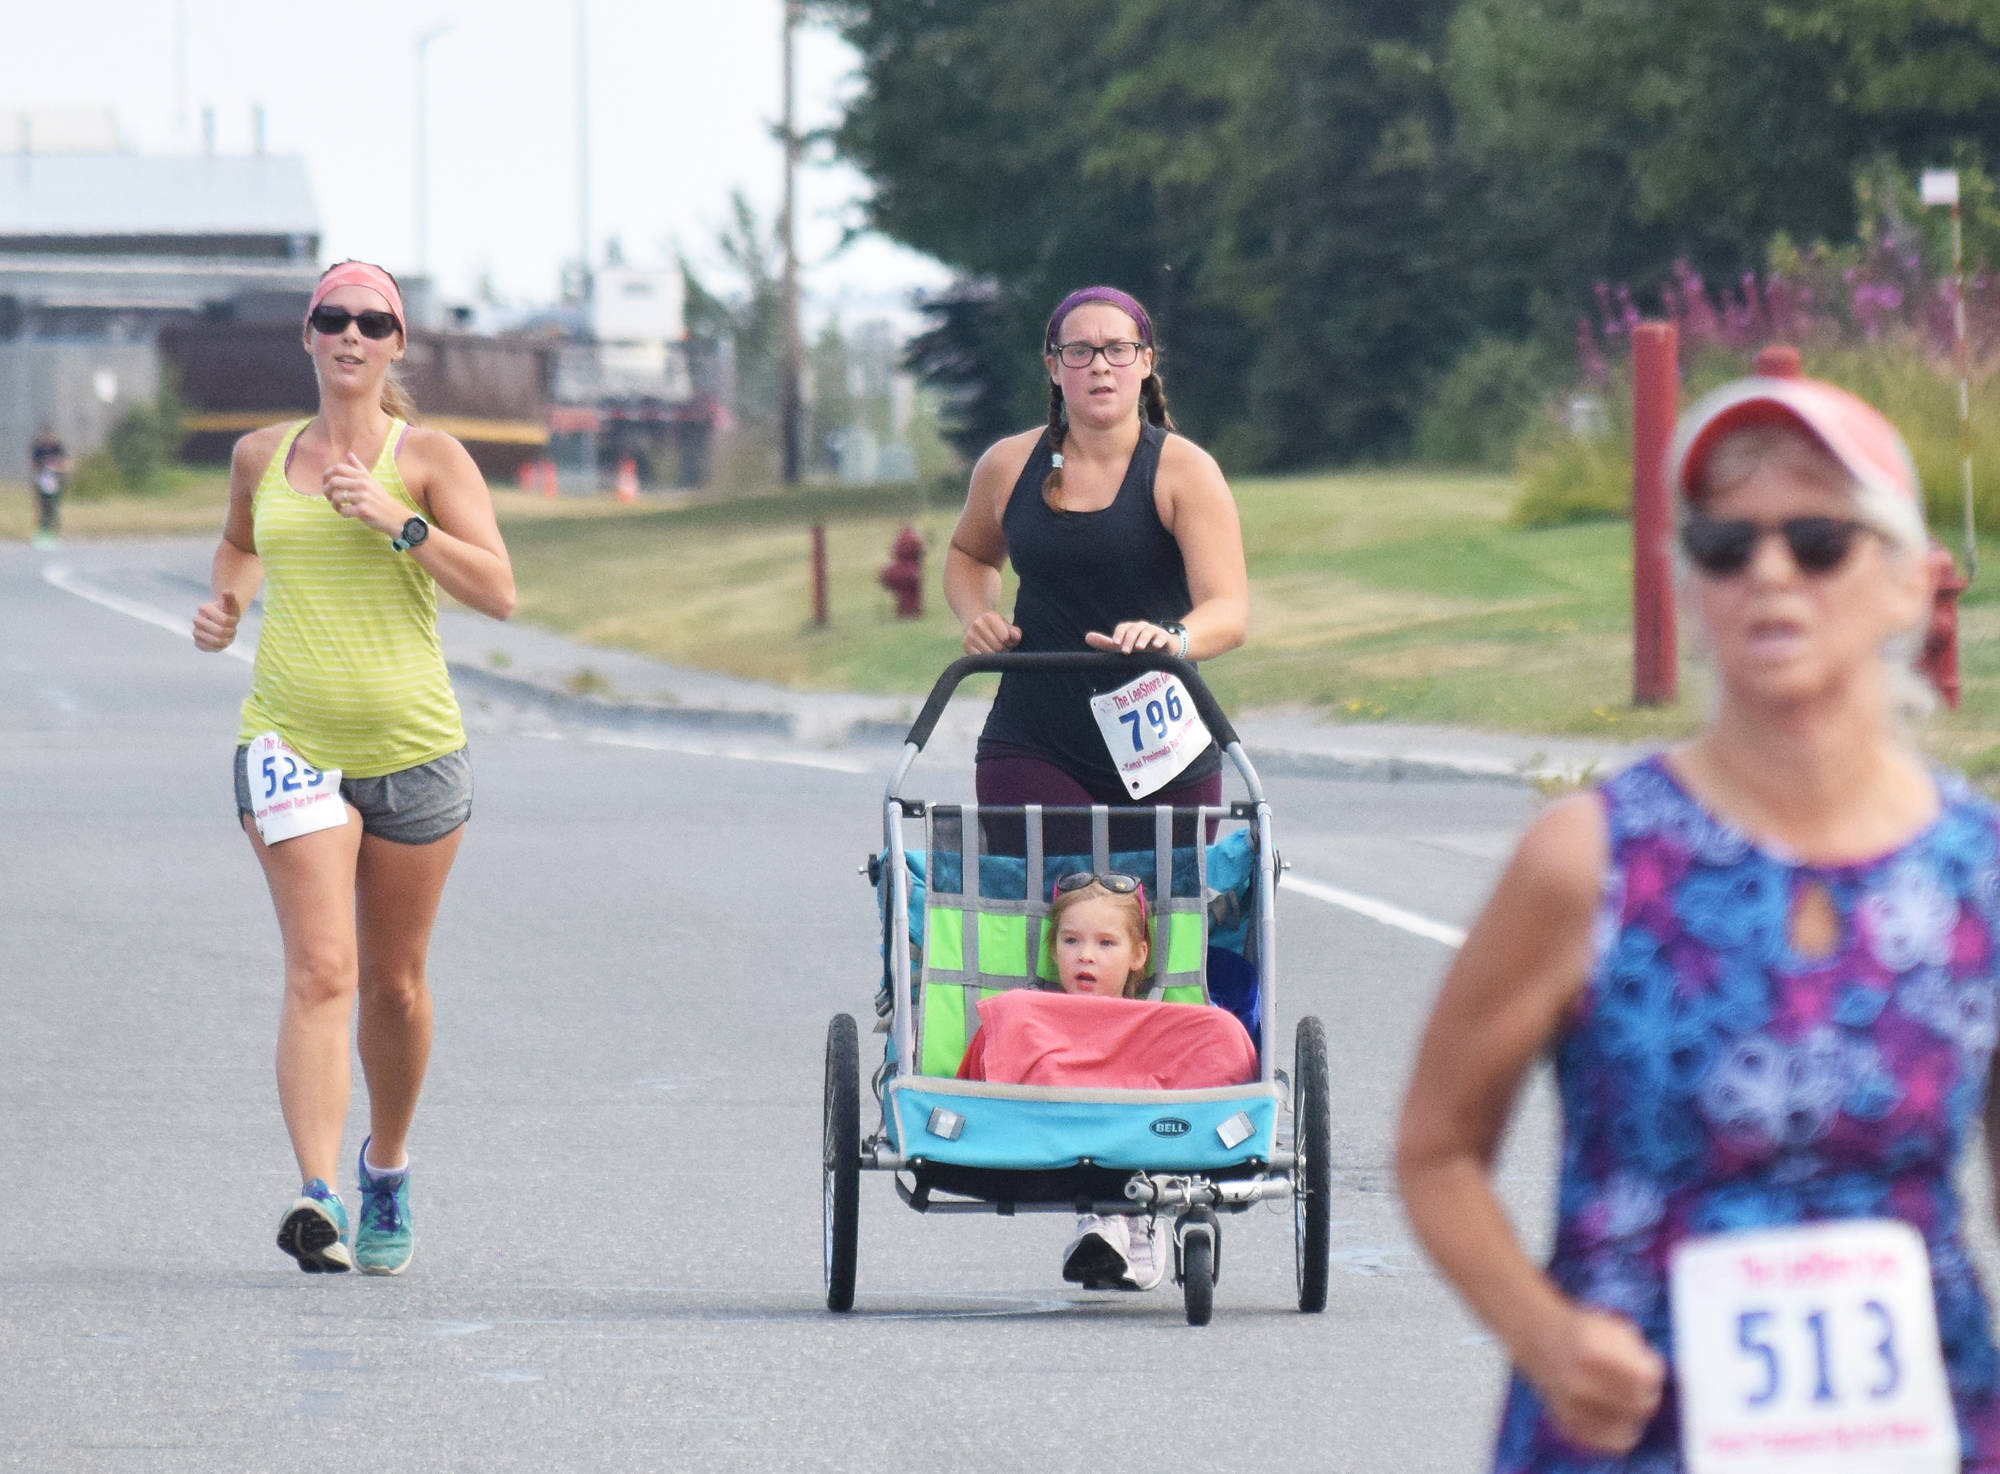 Maggie Nelson (left) and Mollie Pate approach the finish line for the 5K race Saturday, Aug. 10, 2019, at the 32nd annual Run for Women in Kenai, Alaska. (Photo by Joey Klecka/Peninsula Clarion)